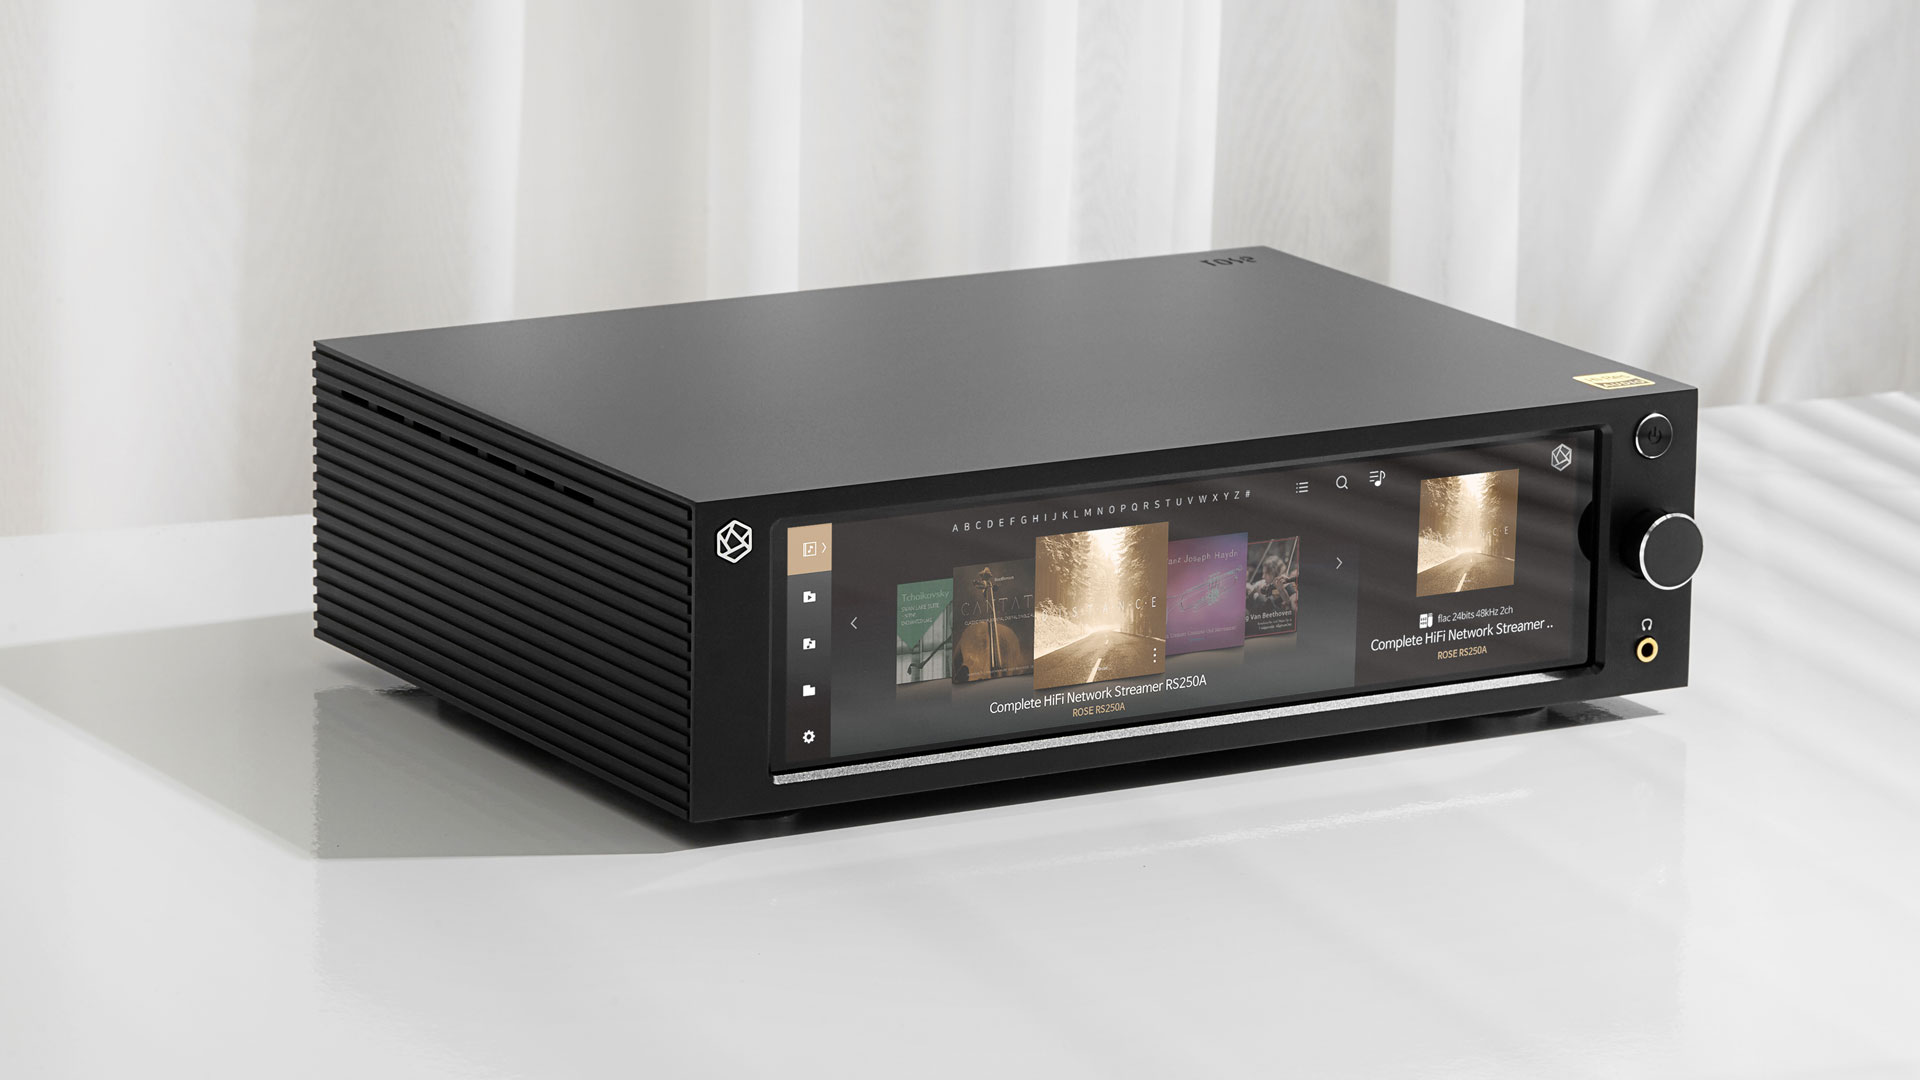 The new streamer RS250A from HiFi Rose (Image Credit: HiFi Rose)